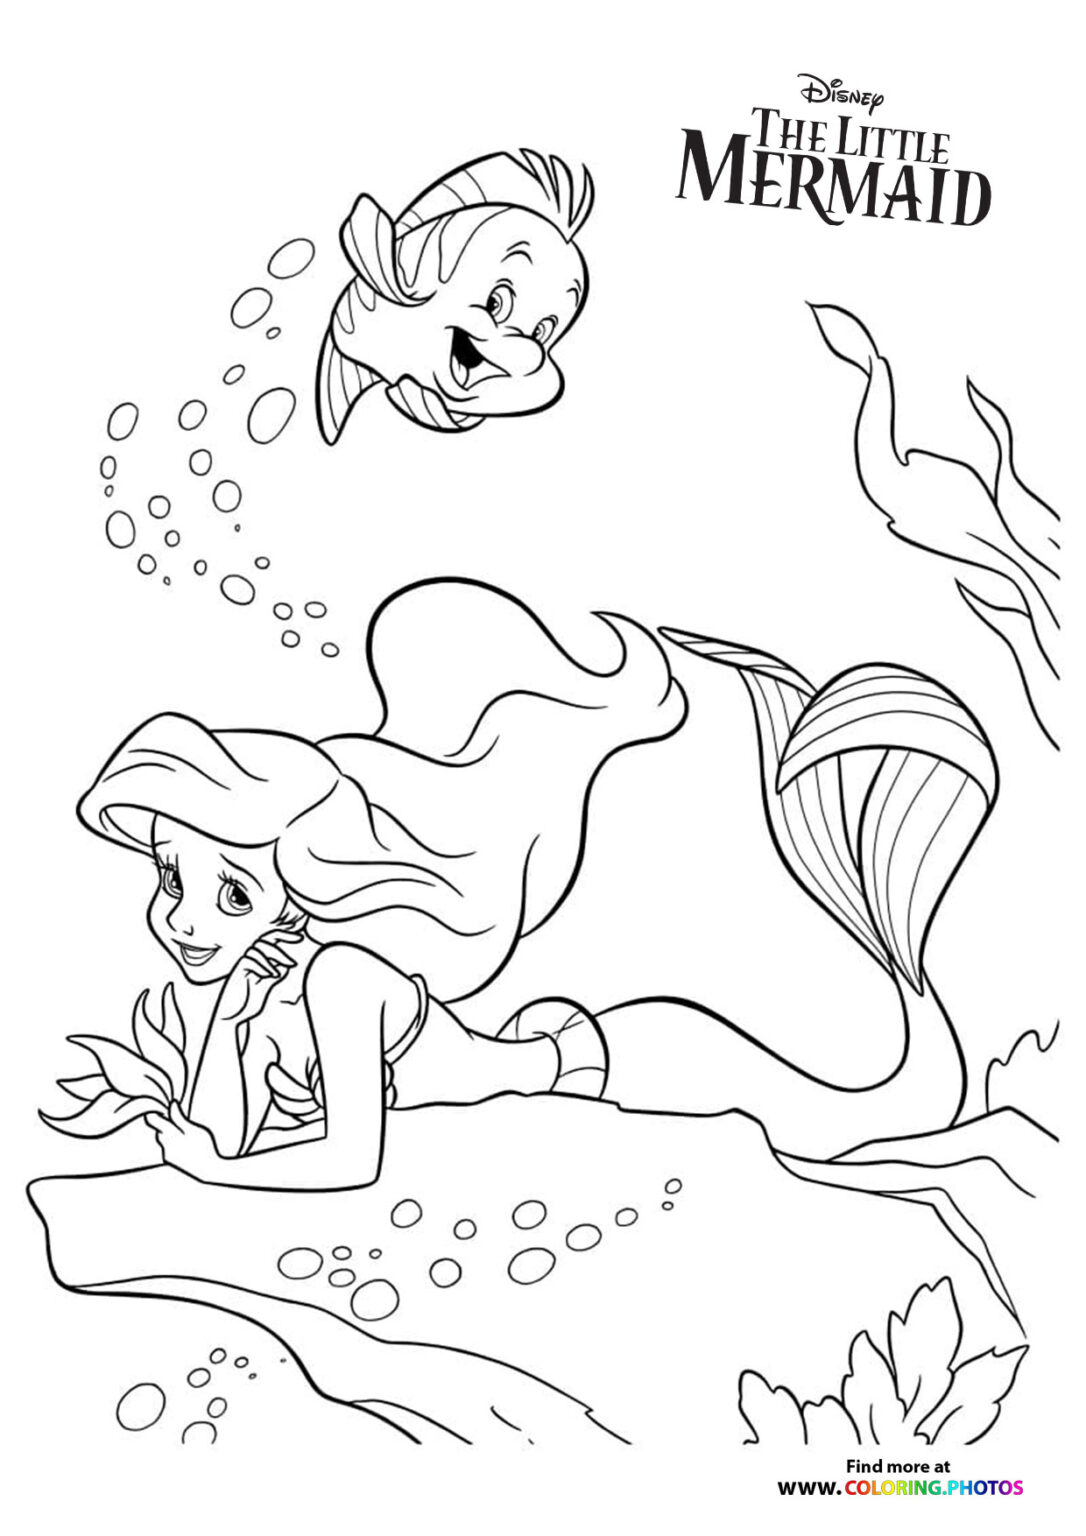 Ariel and Flounder swimming   Coloring Pages for kids